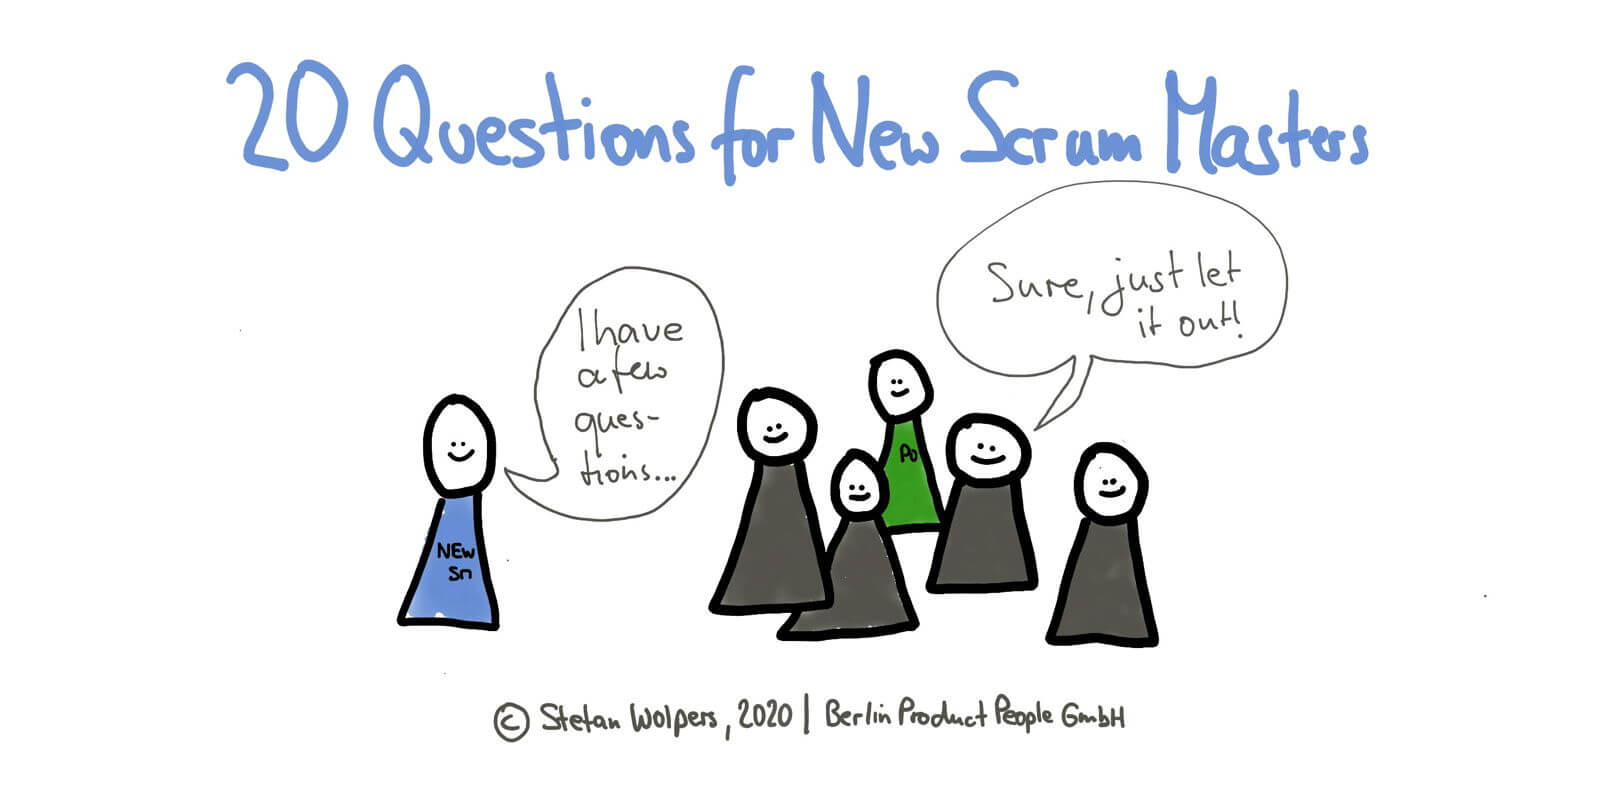 20 Questions New Scrum Masters Should Ask Their Teams to Get up to Speed — Berlin Product People GmbH